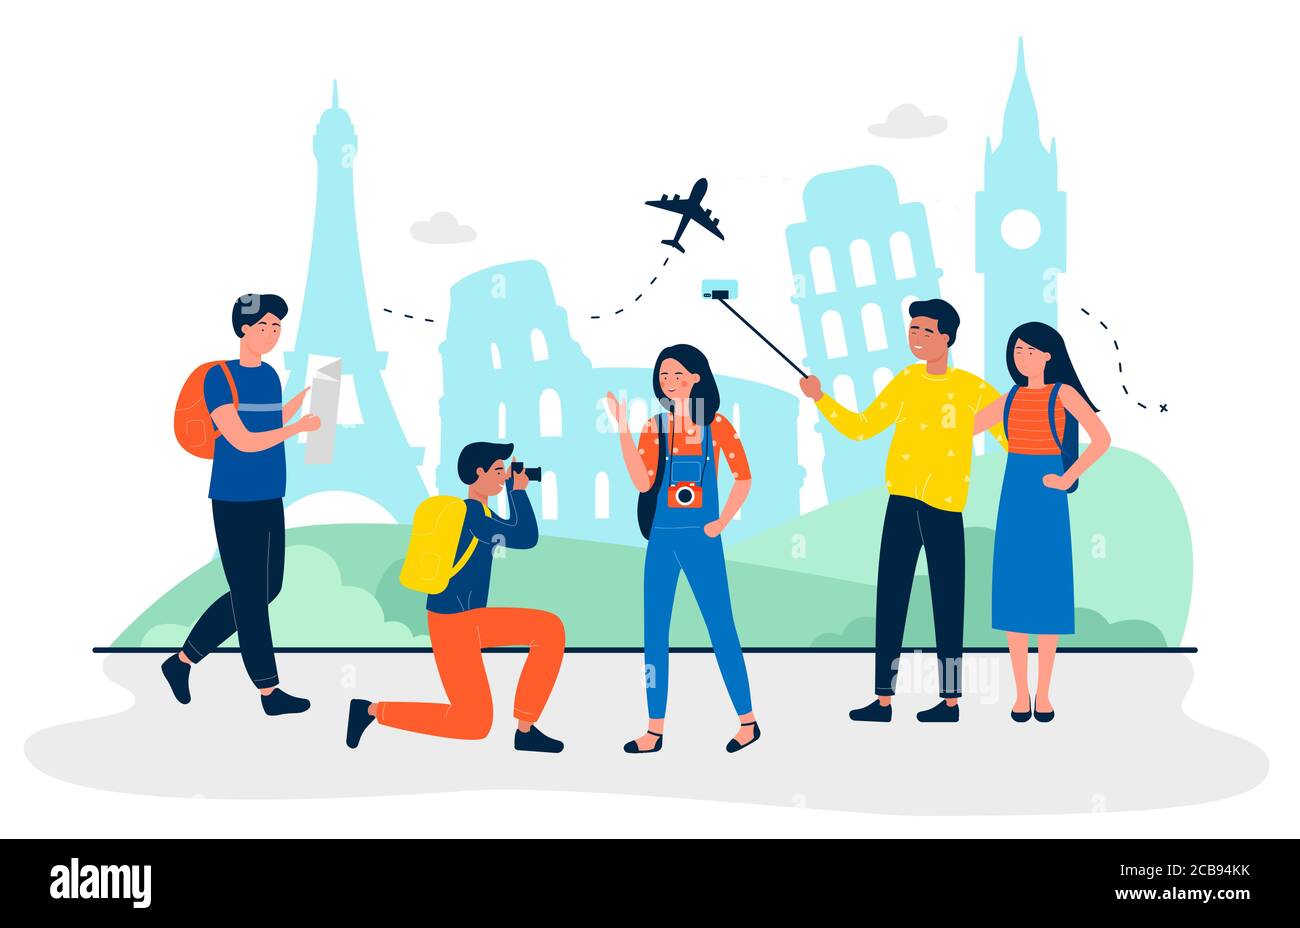 Tourists are at sightseeing flat travel concept vector illustration. People making photo and selfie for memory. Travel agency, leisure industry, airlines, individual and group tours Stock Vector